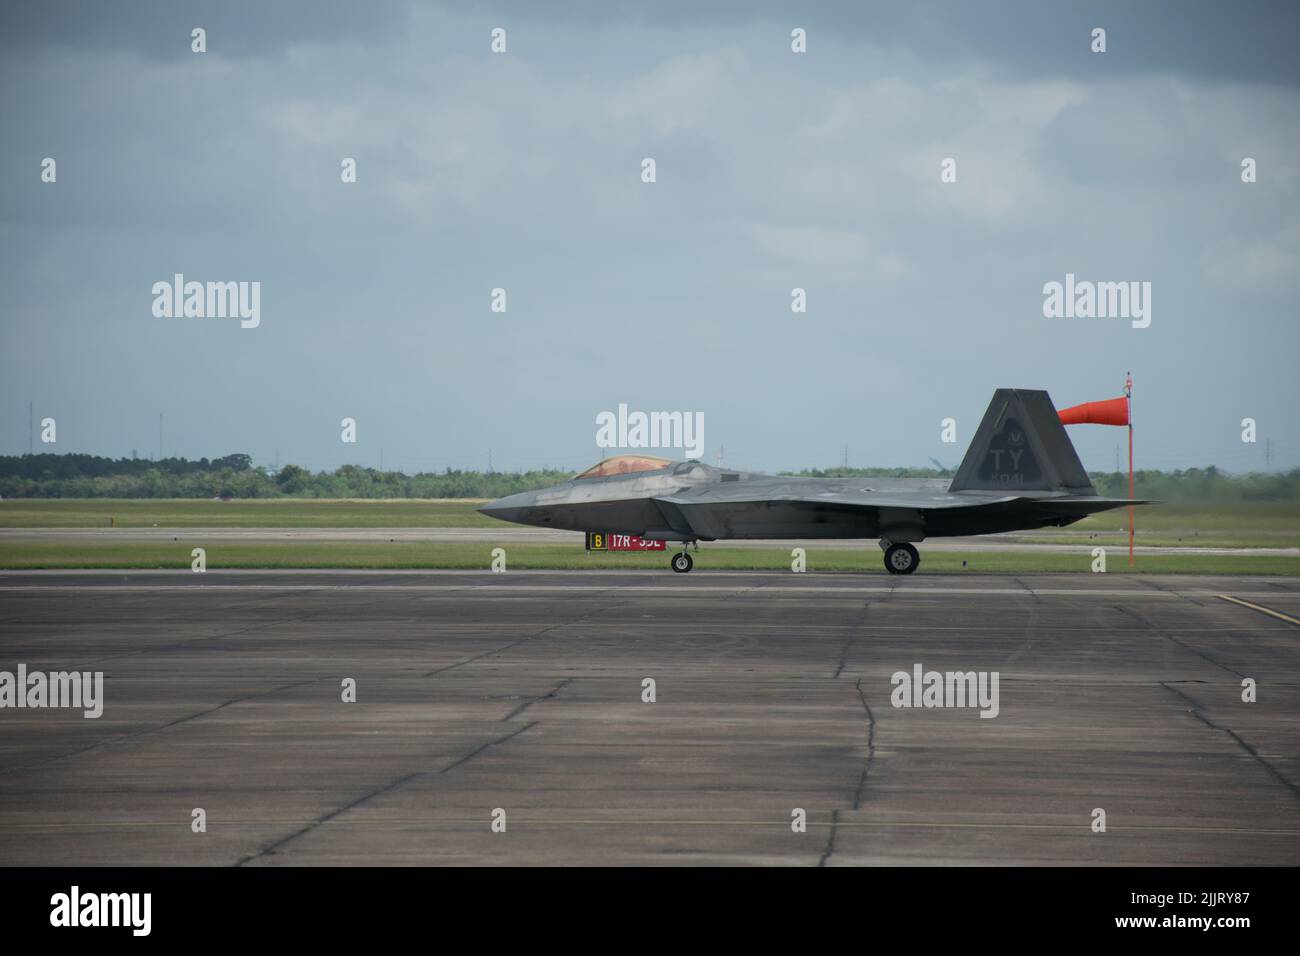 A F22 Raptor aircraft on a runway under a gray cloudy sky in Houston Stock Photo